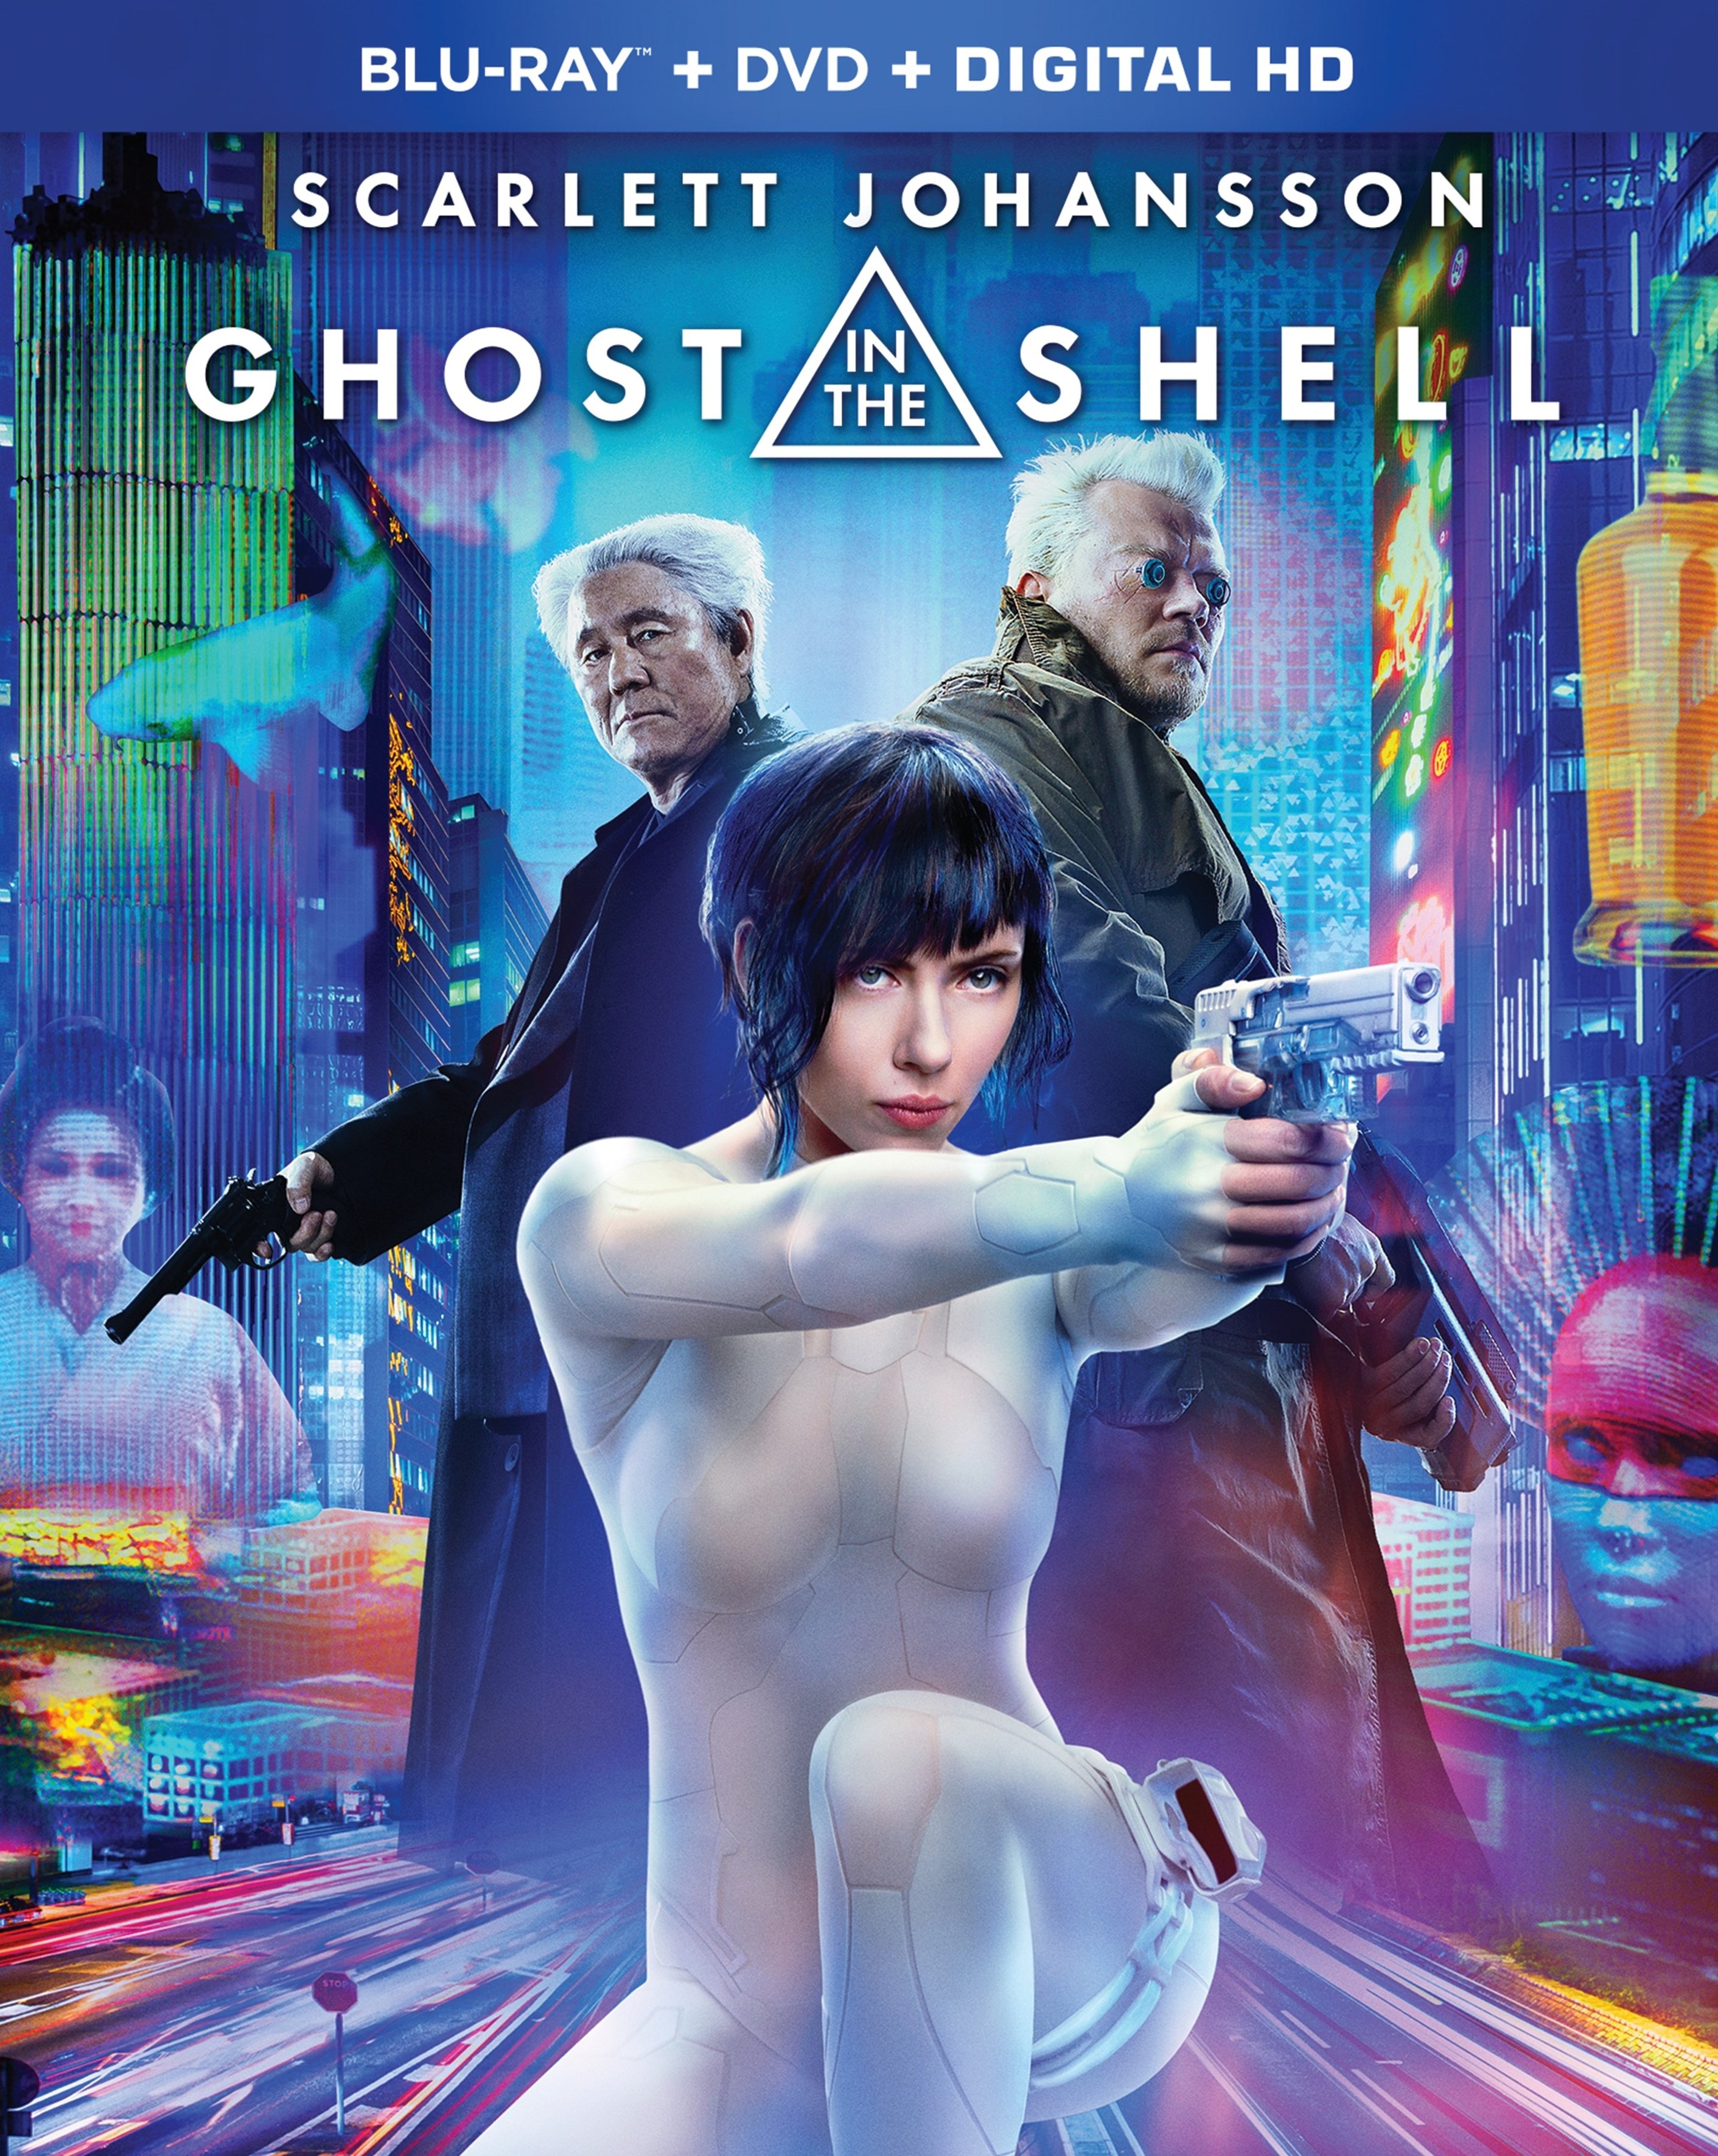 Ghost in the Shell [Includes Digital Copy] [Blu-ray/DVD] [2017] - Best Buy